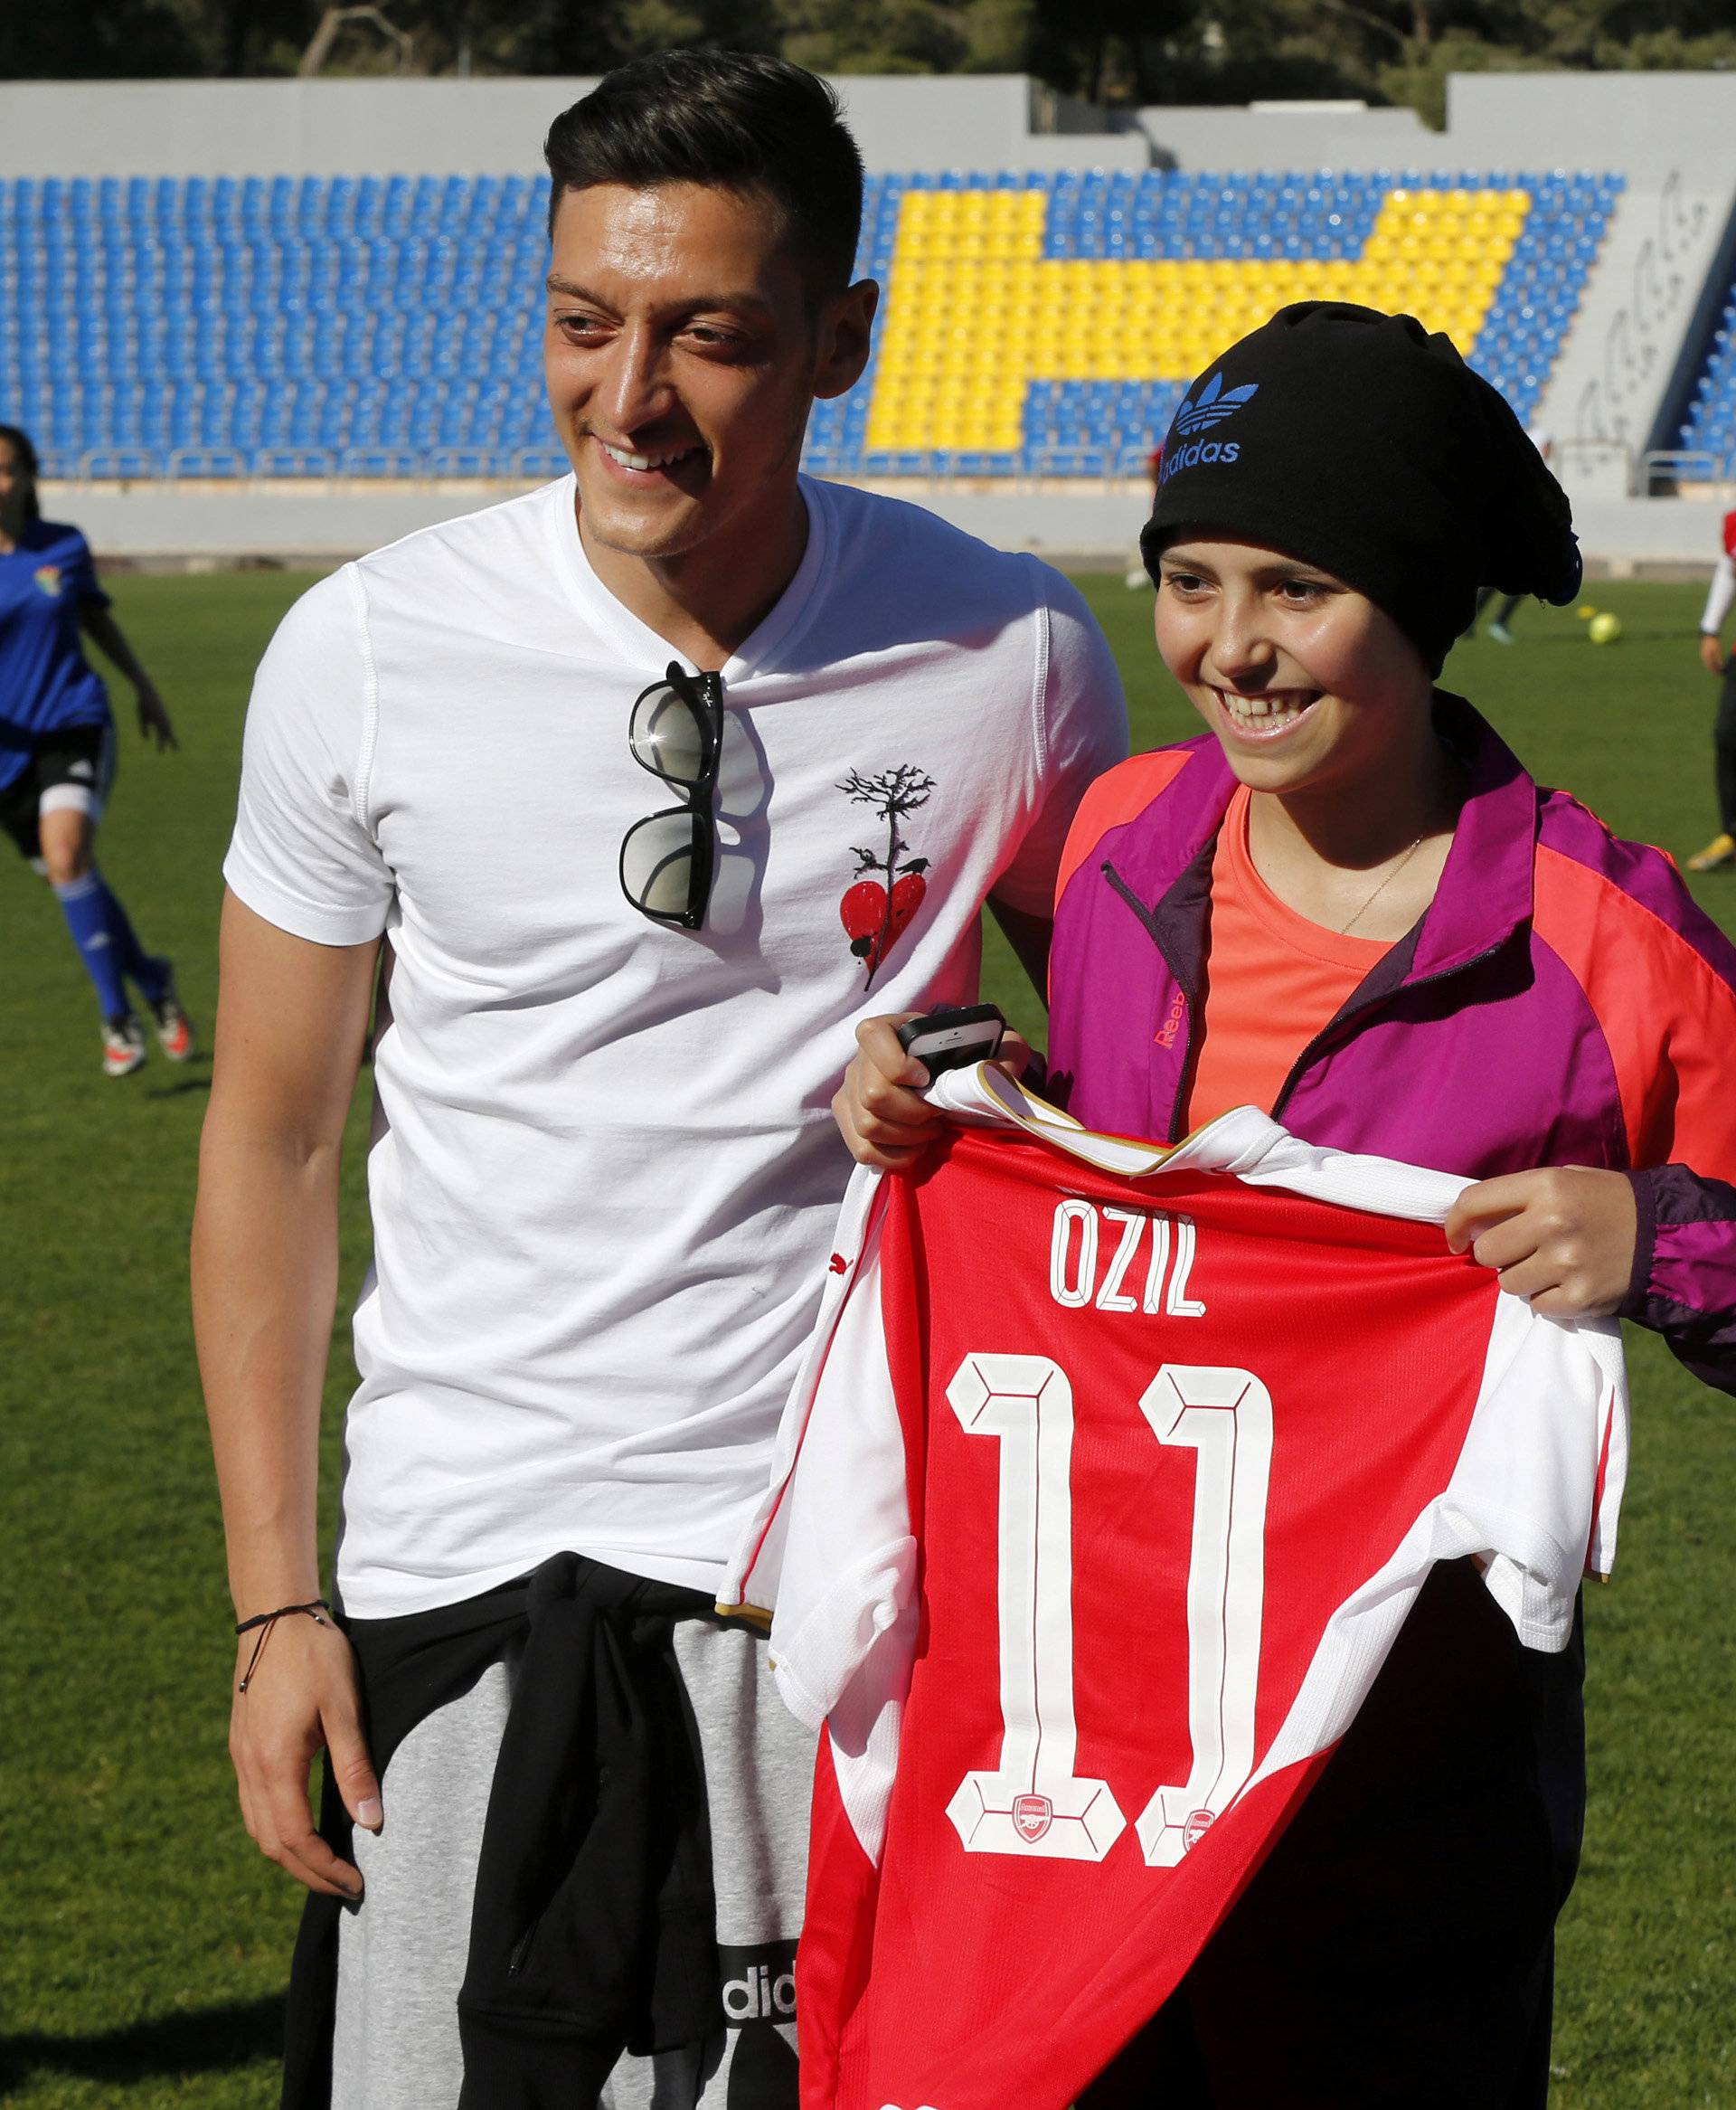 Germany and Arsenal player Ozil and Jordan's Prince Ali Bin Al Hussein President of the Jordan Football Association and Founder and Chairman of AFDP, pose with Jordanian cancer patient player Rama Al-Qadi in Amman